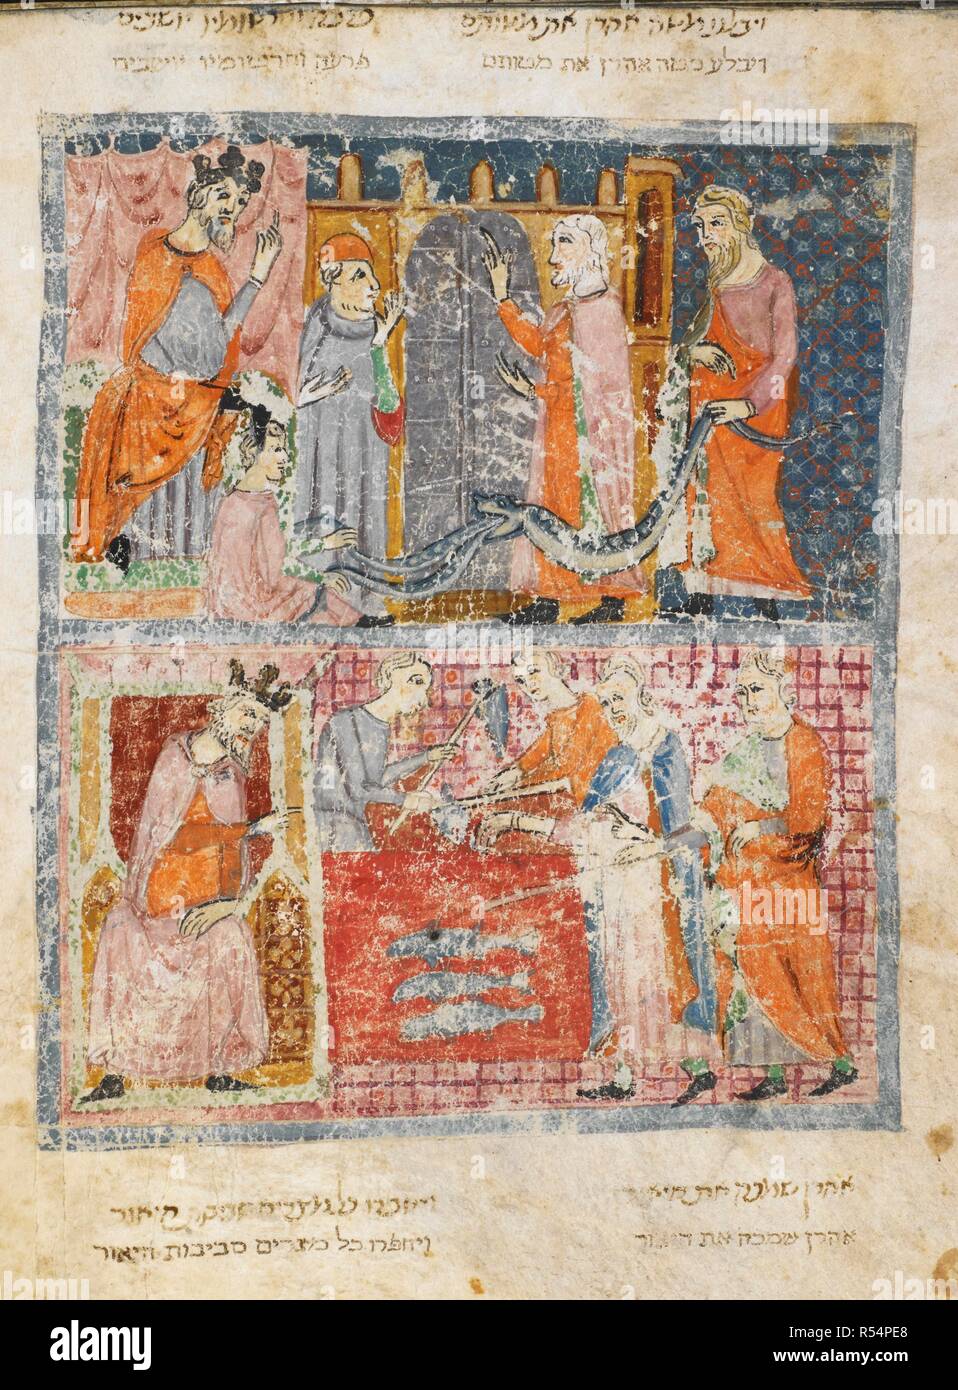 Moses and Aaron before Pharoah.  Aaron's rod turns into a serpent; Moses turns the water into blood. Sister Haggadah. Catalonia, mid 14th century. Source: Or. 2884, f.13v. Language: Hebrew. Stock Photo